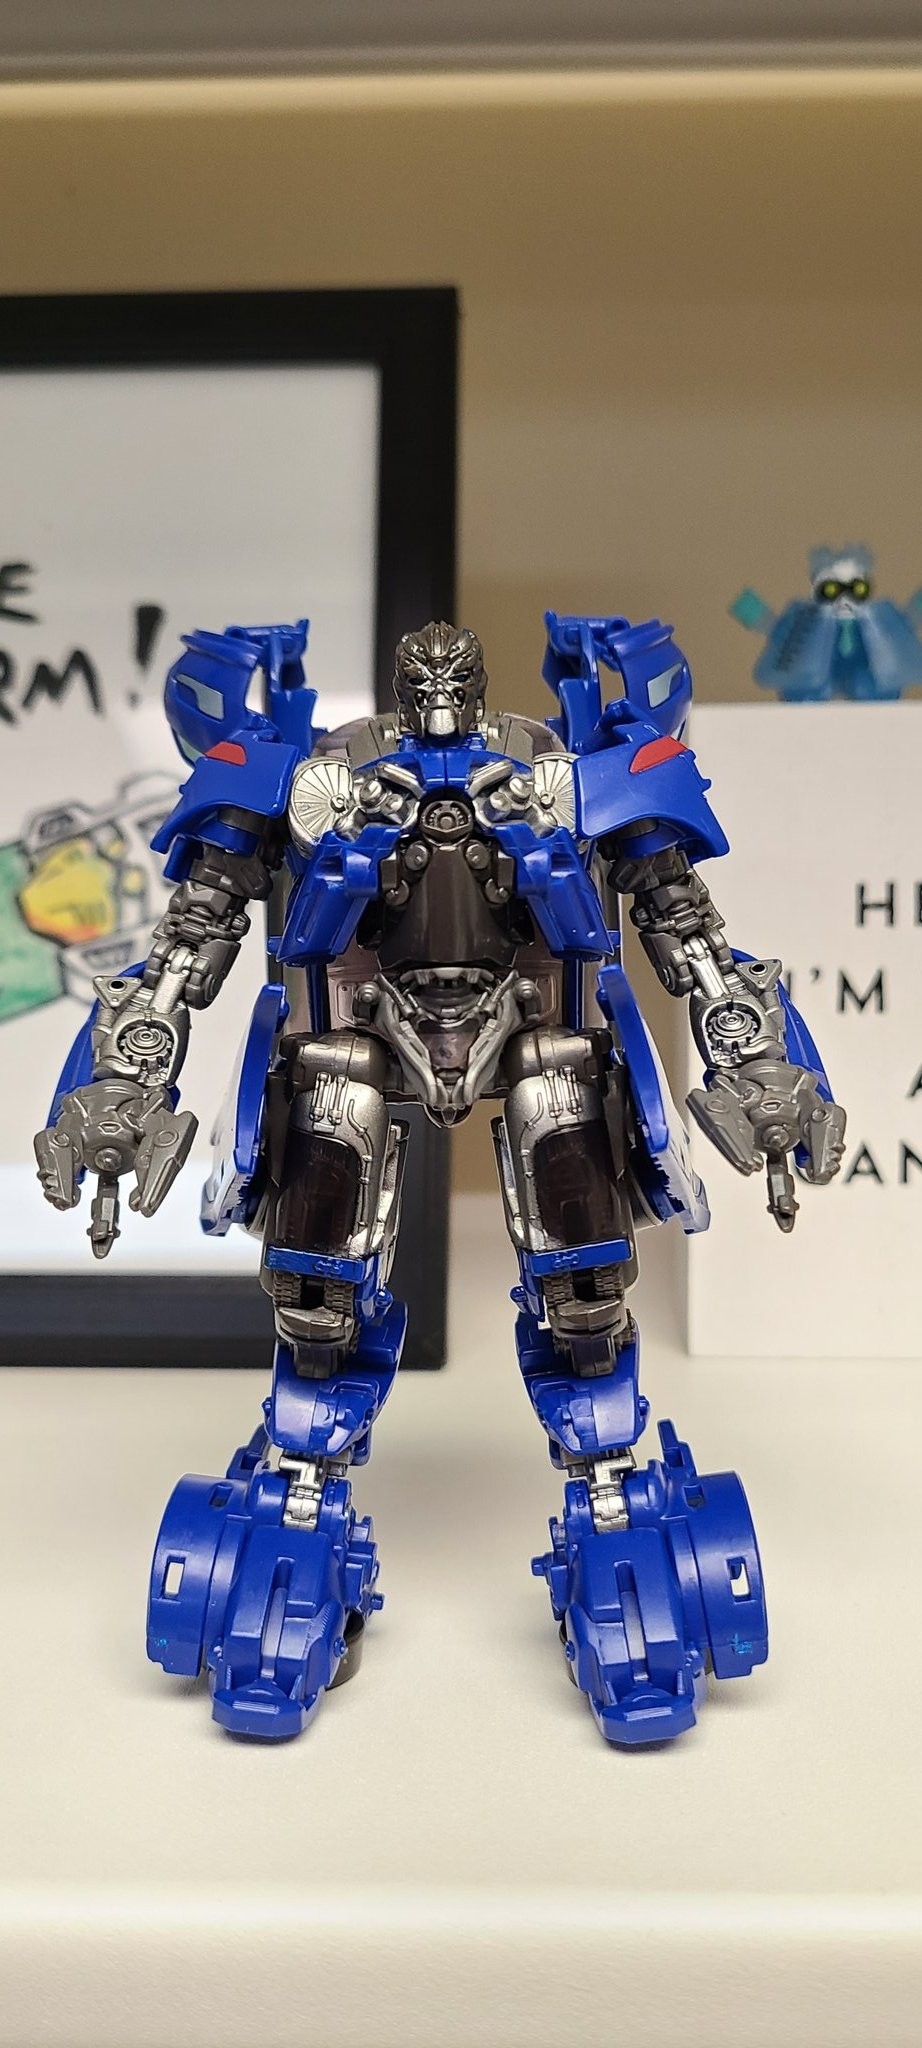 Transformers News: In Hand Images of Transformers Studio Series Revenge of the Fallen Deluxe Class Jolt